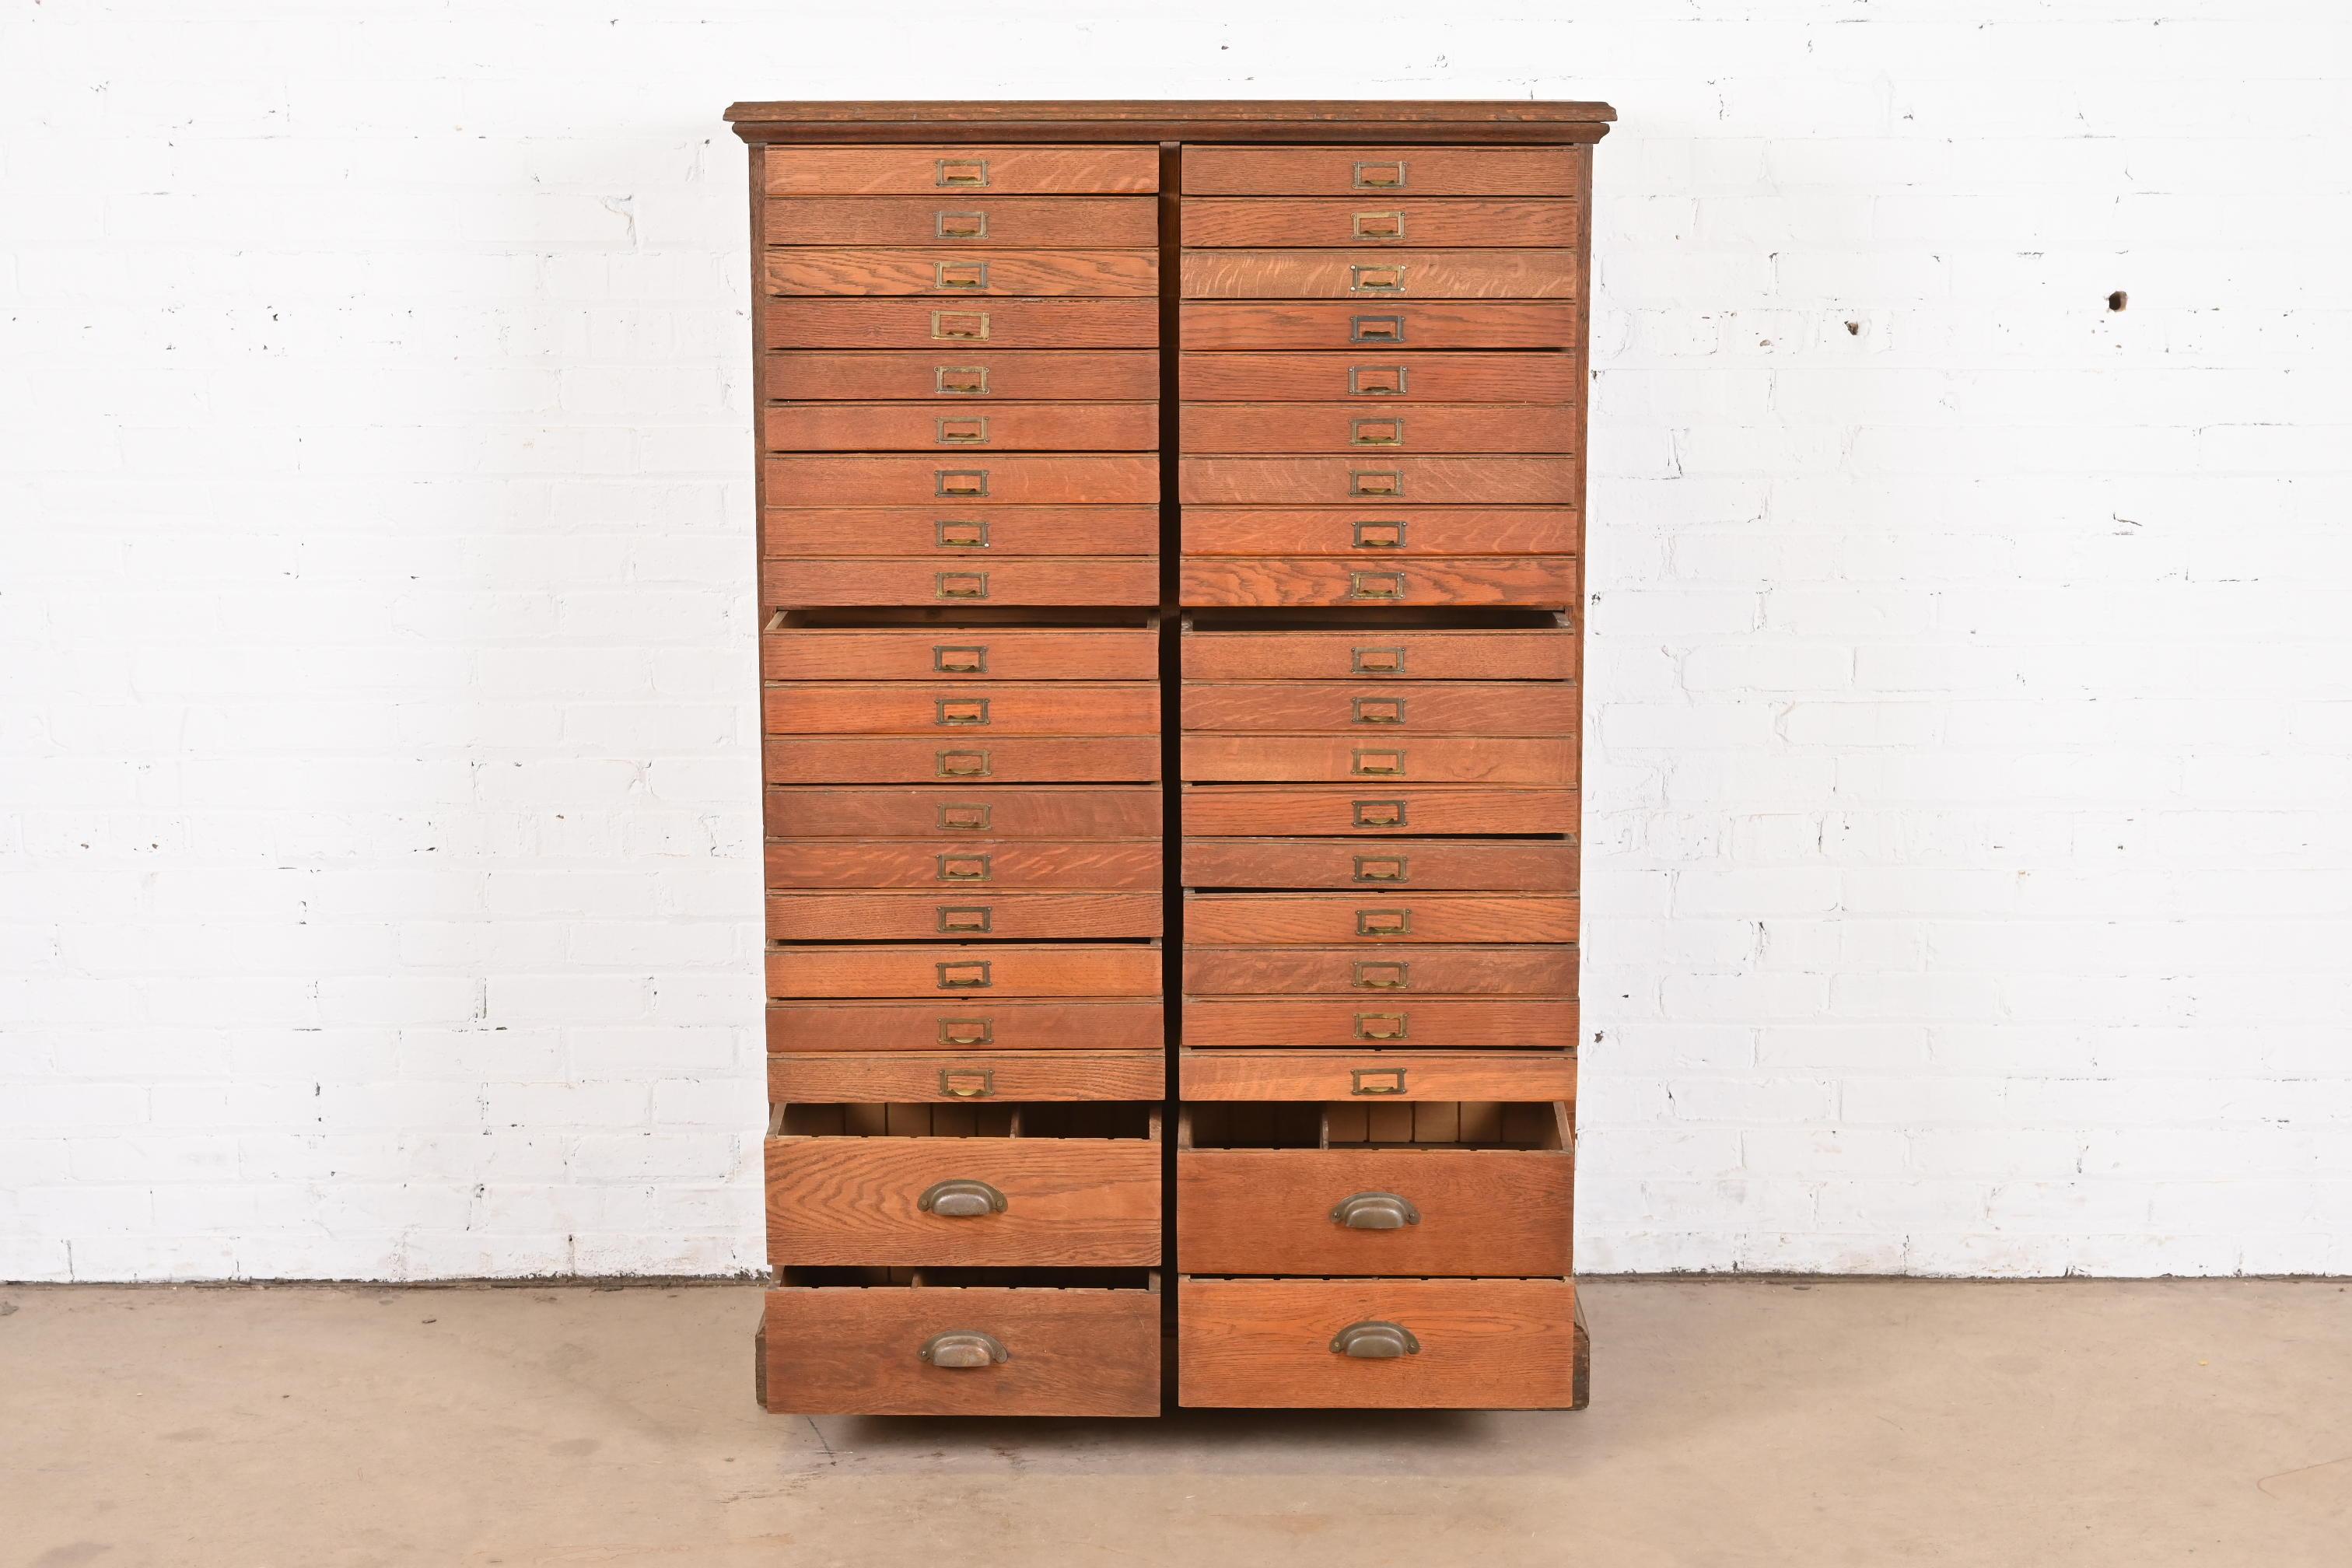 American Antique Arts & Crafts Oak 40-Drawer File Cabinet or Chest of Drawers, Circa 1900 For Sale